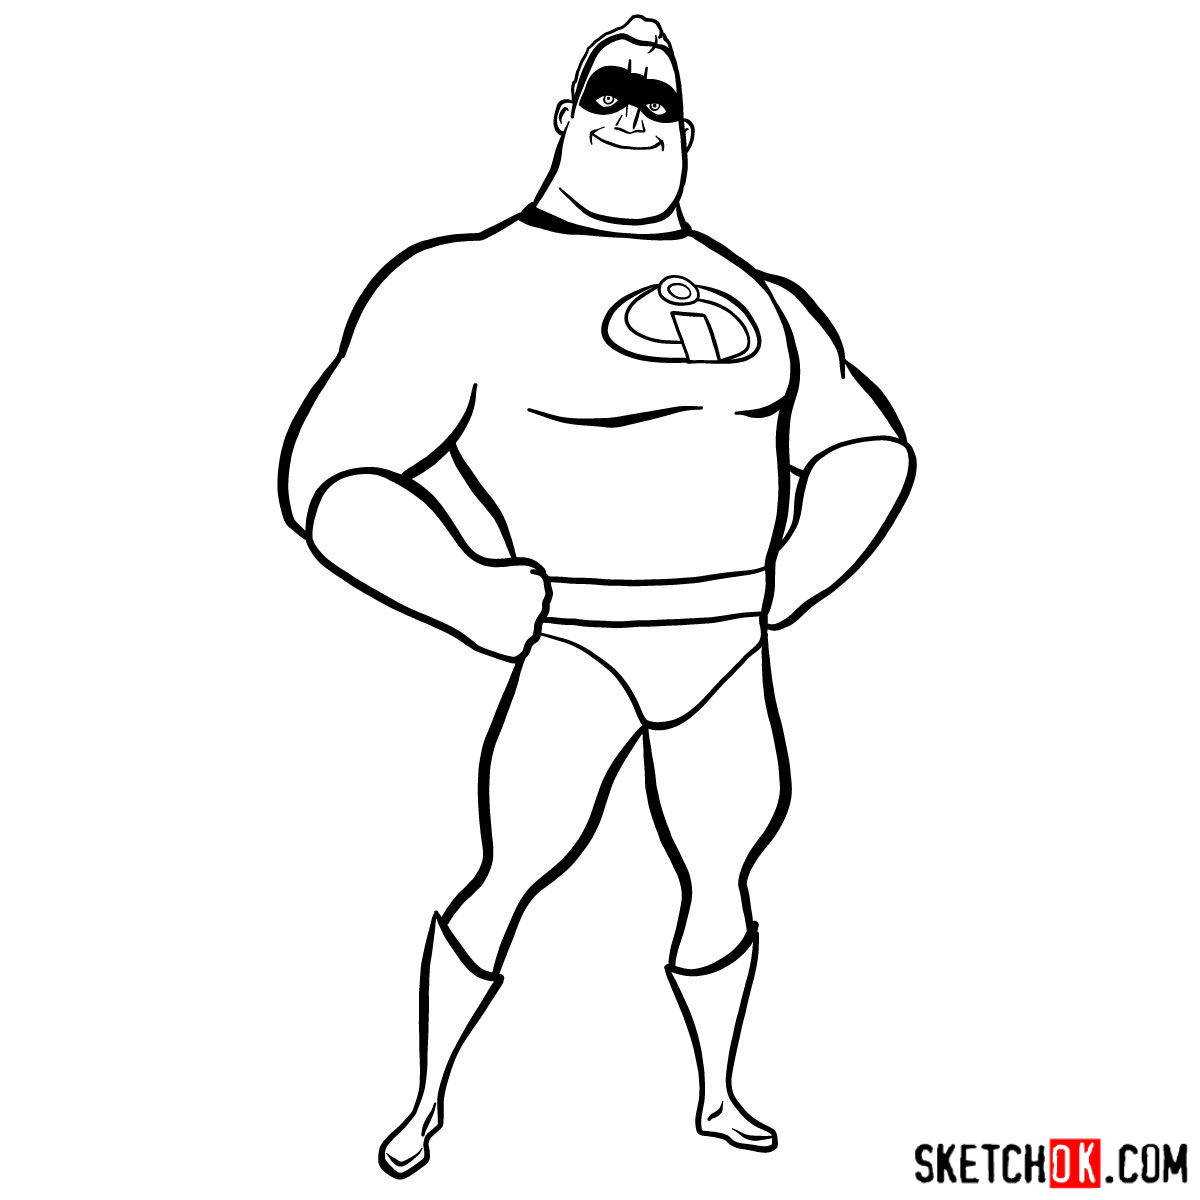 How to draw Bob Parr (Mr. Incredible) - step 10